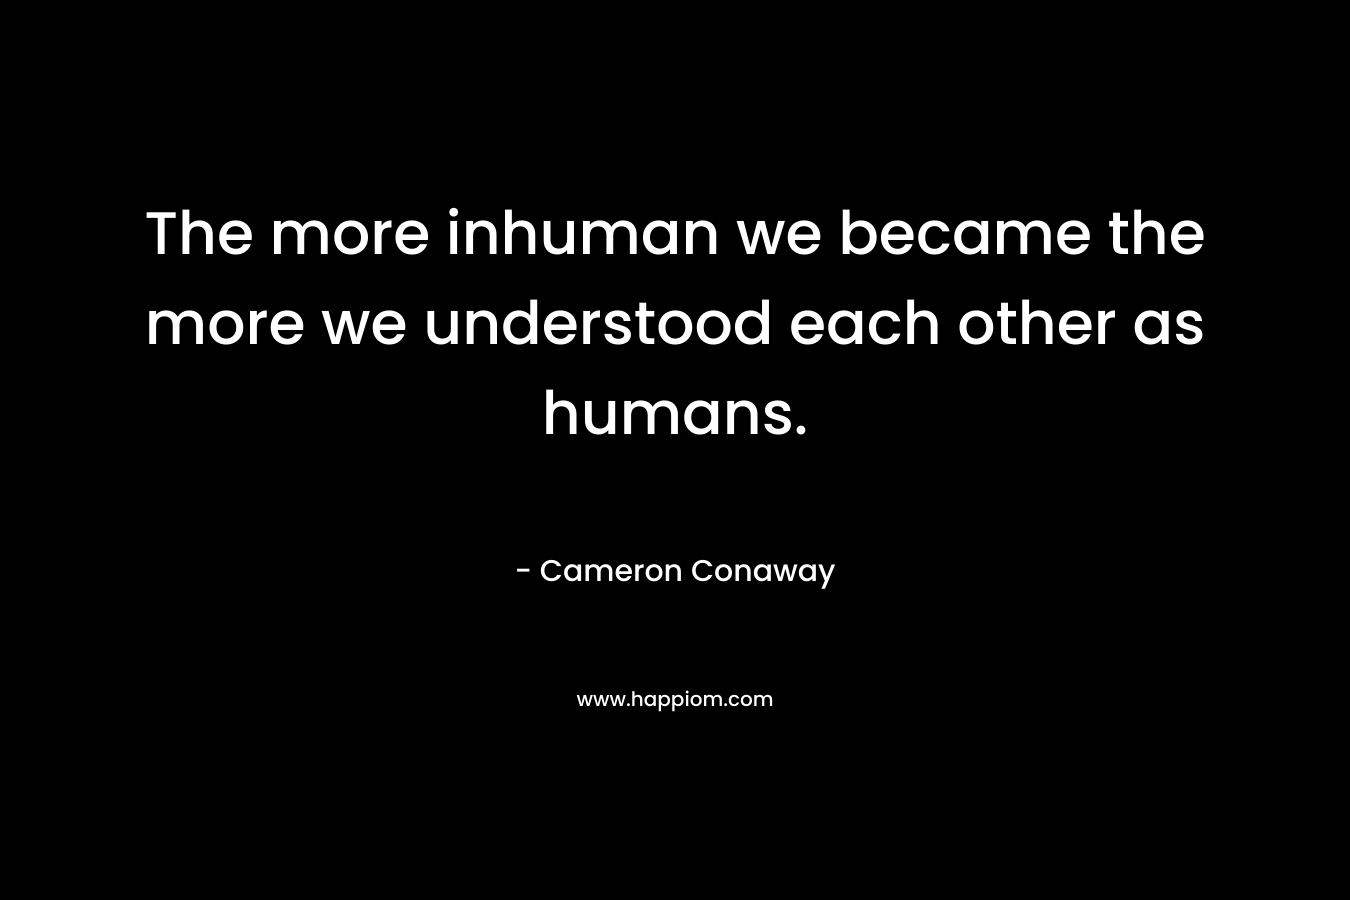 The more inhuman we became the more we understood each other as humans. – Cameron Conaway